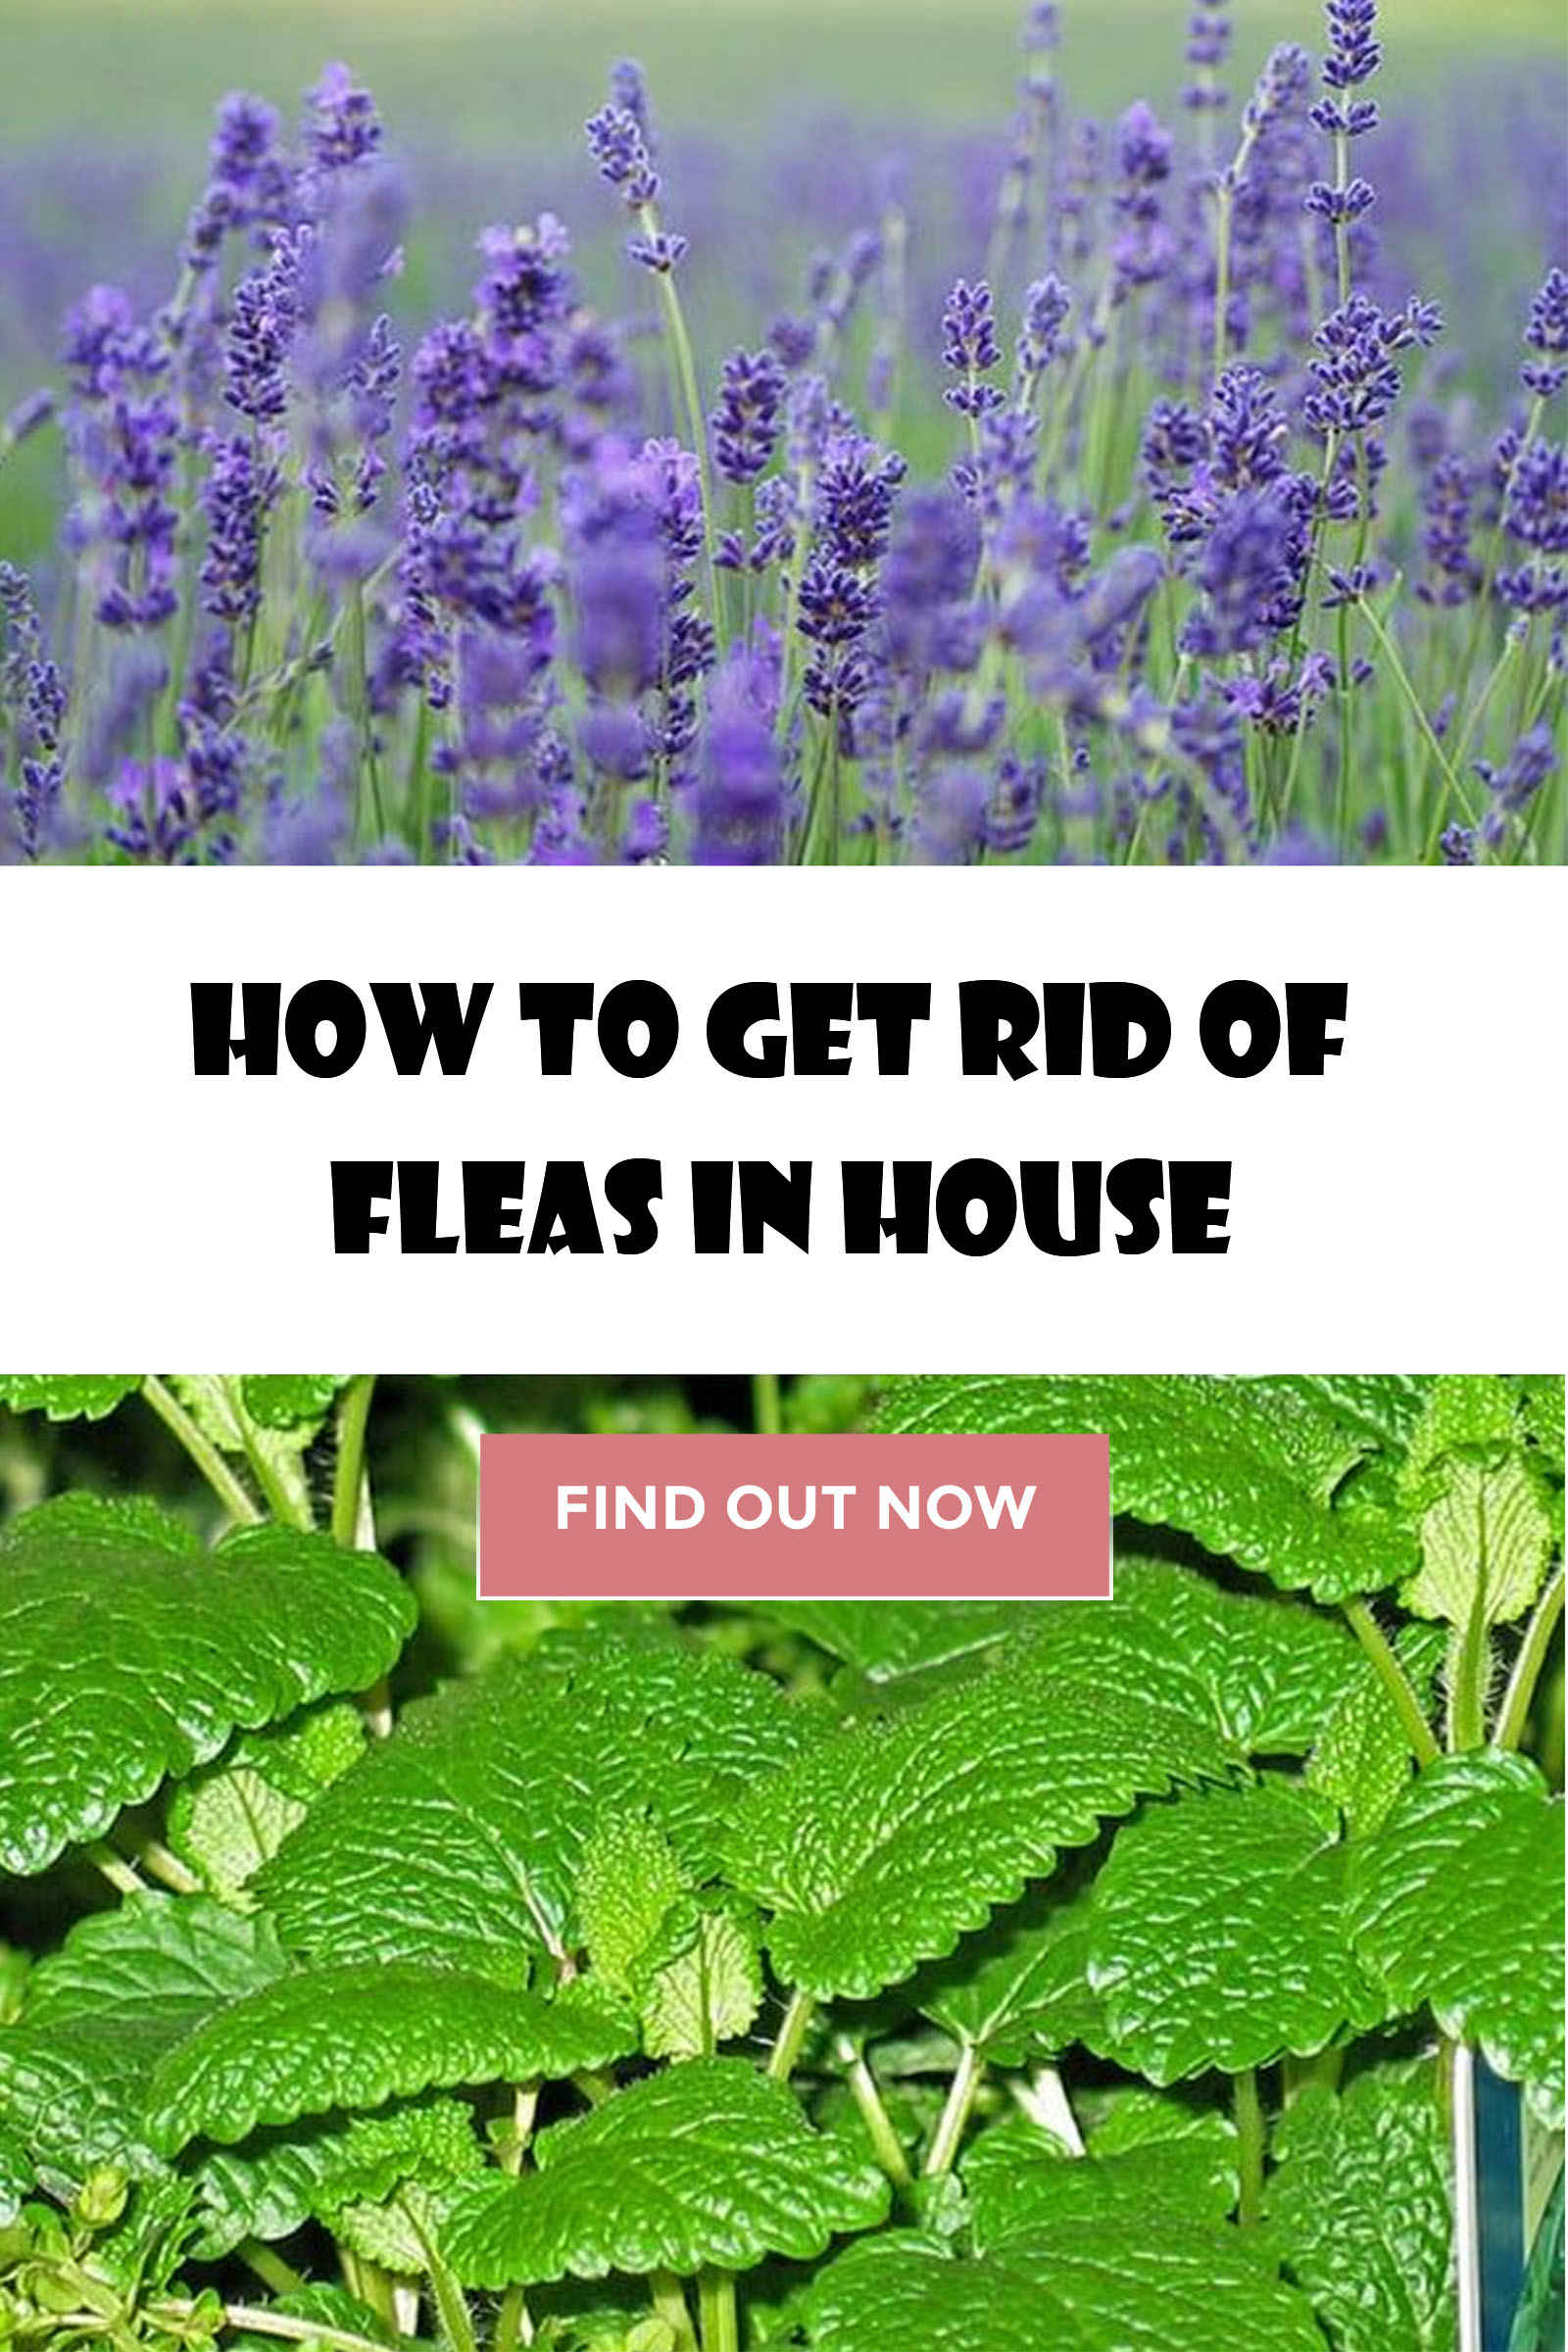 How to get rid of fleas in house, yard and pets.